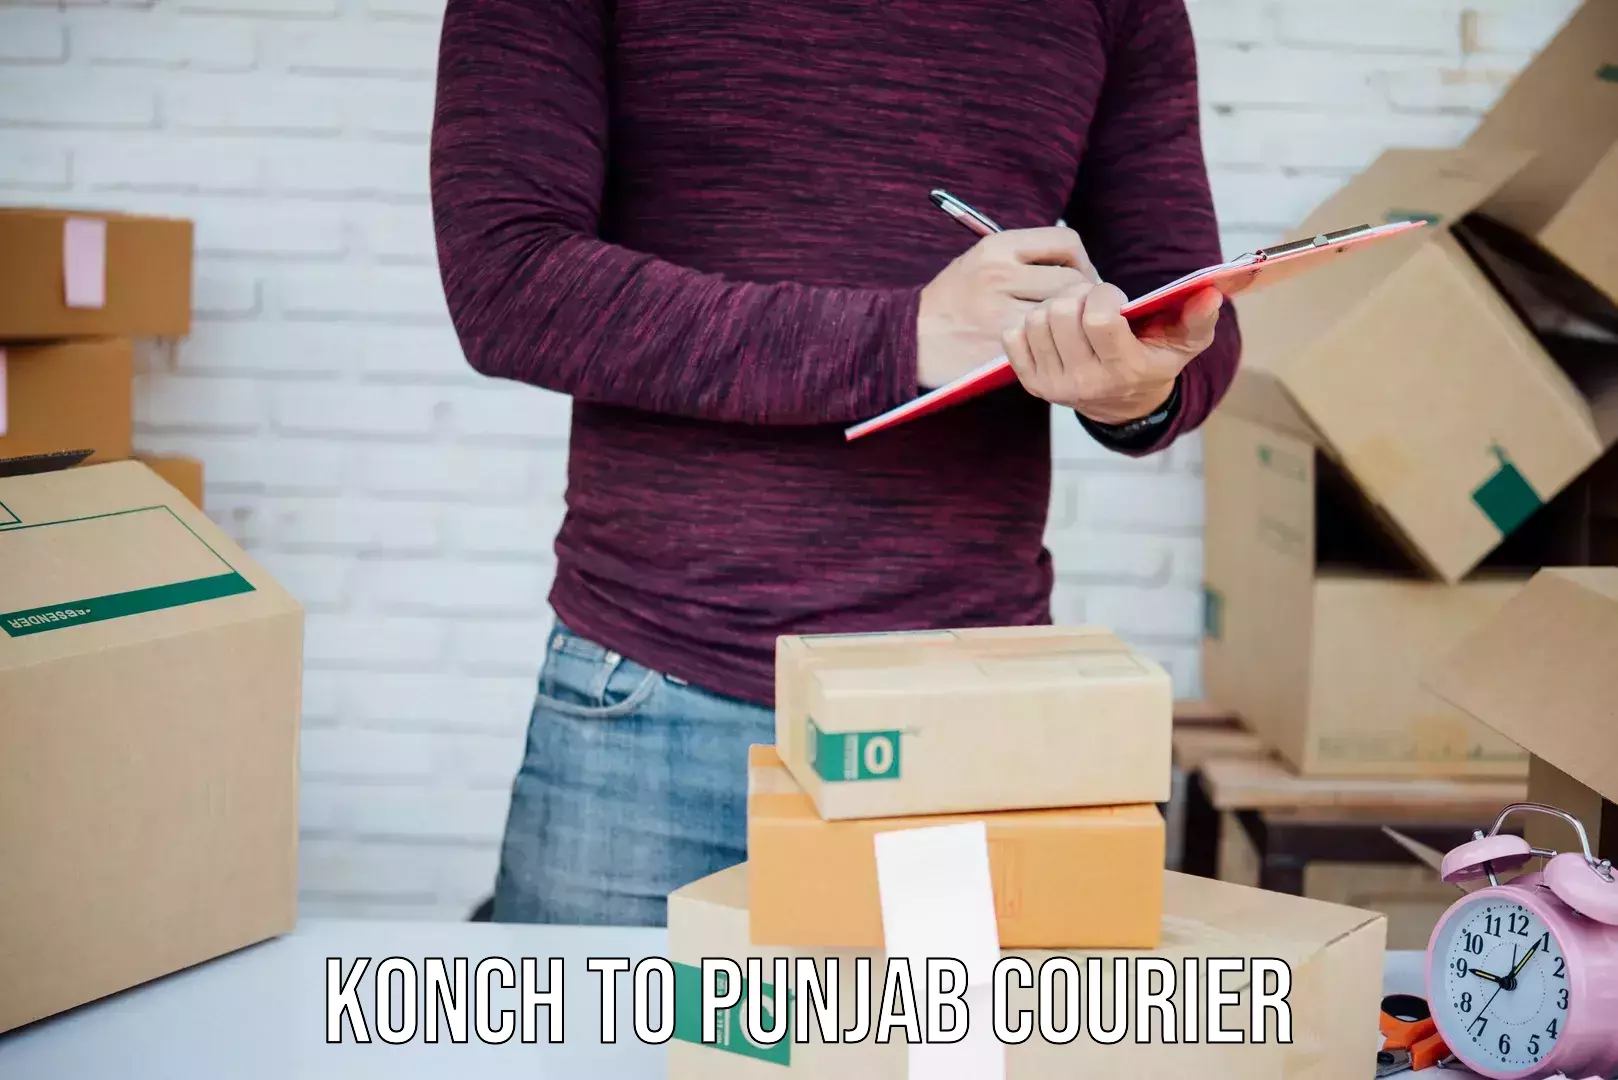 Courier insurance Konch to Dhilwan